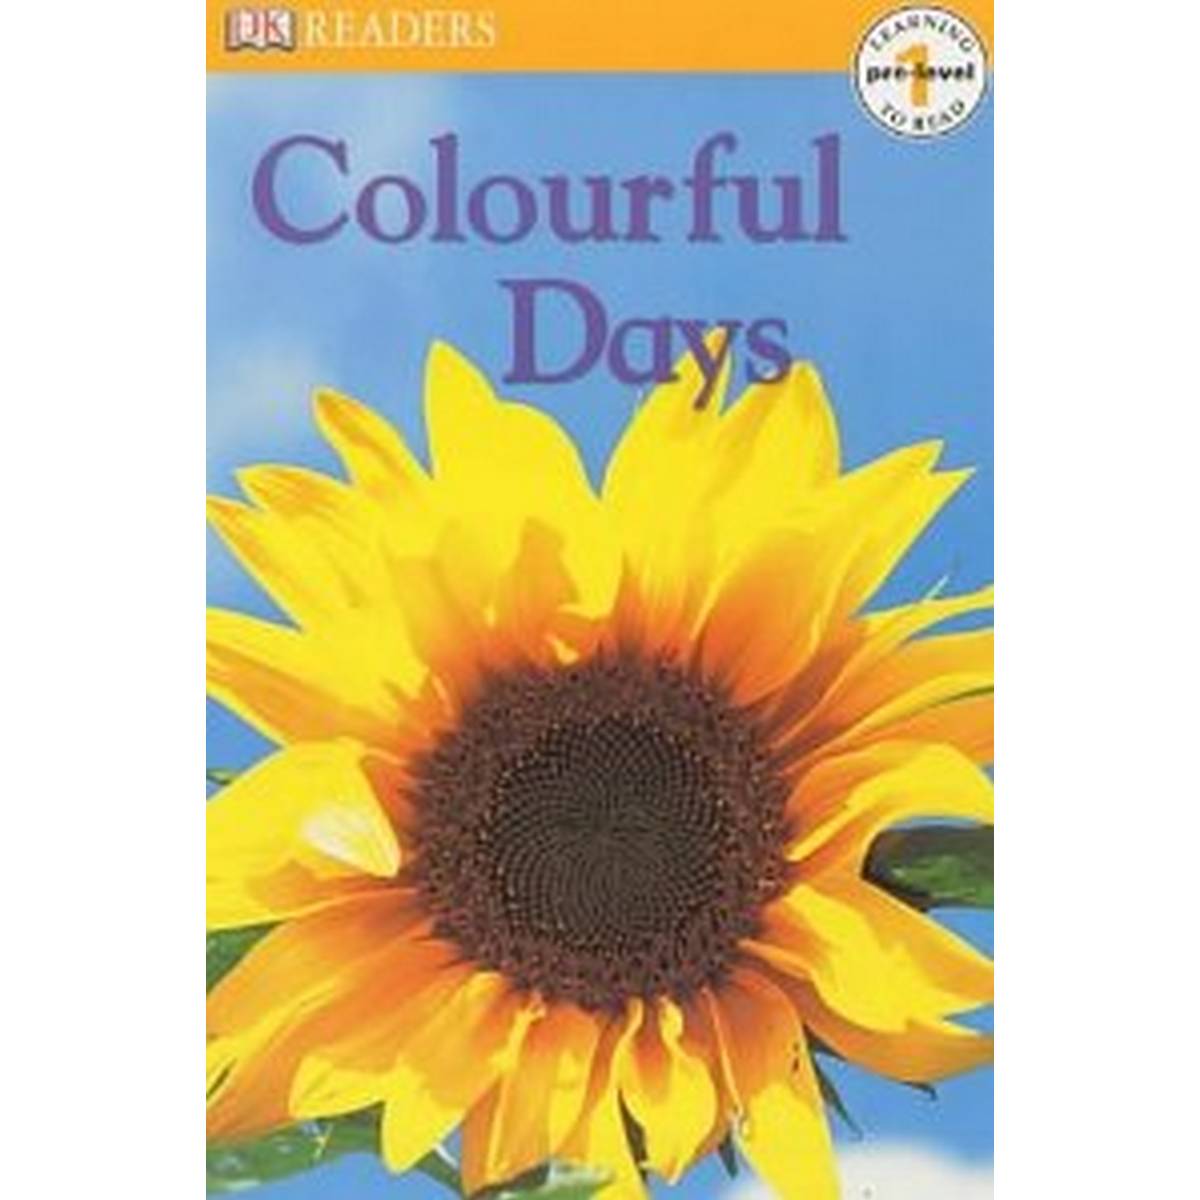 Colourful Days (Dk Readers pre-level 1)